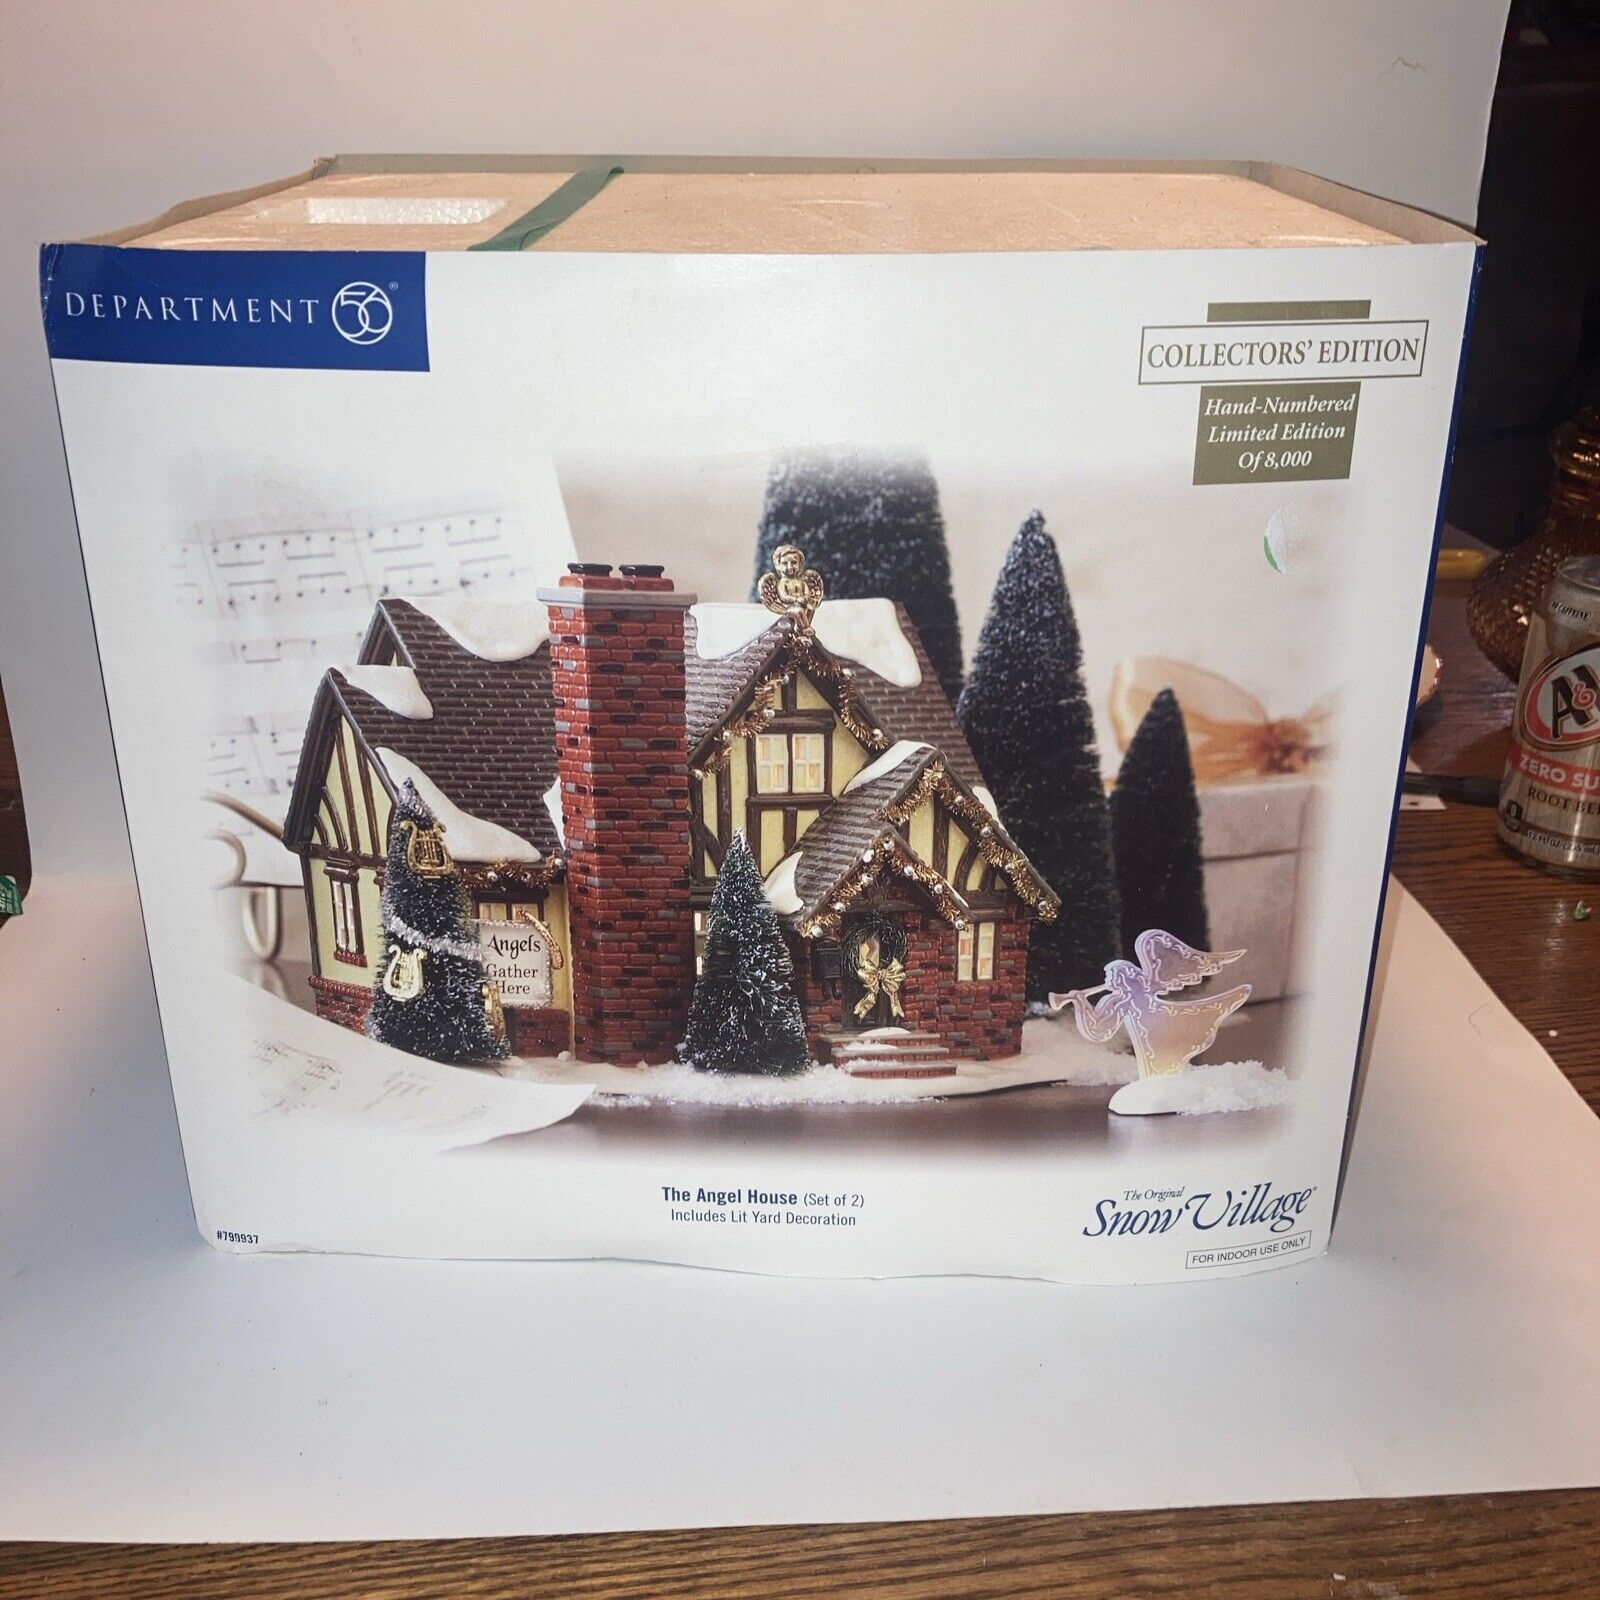 Department 56 Snow Village - The Angel House - Collector's Edition #799937